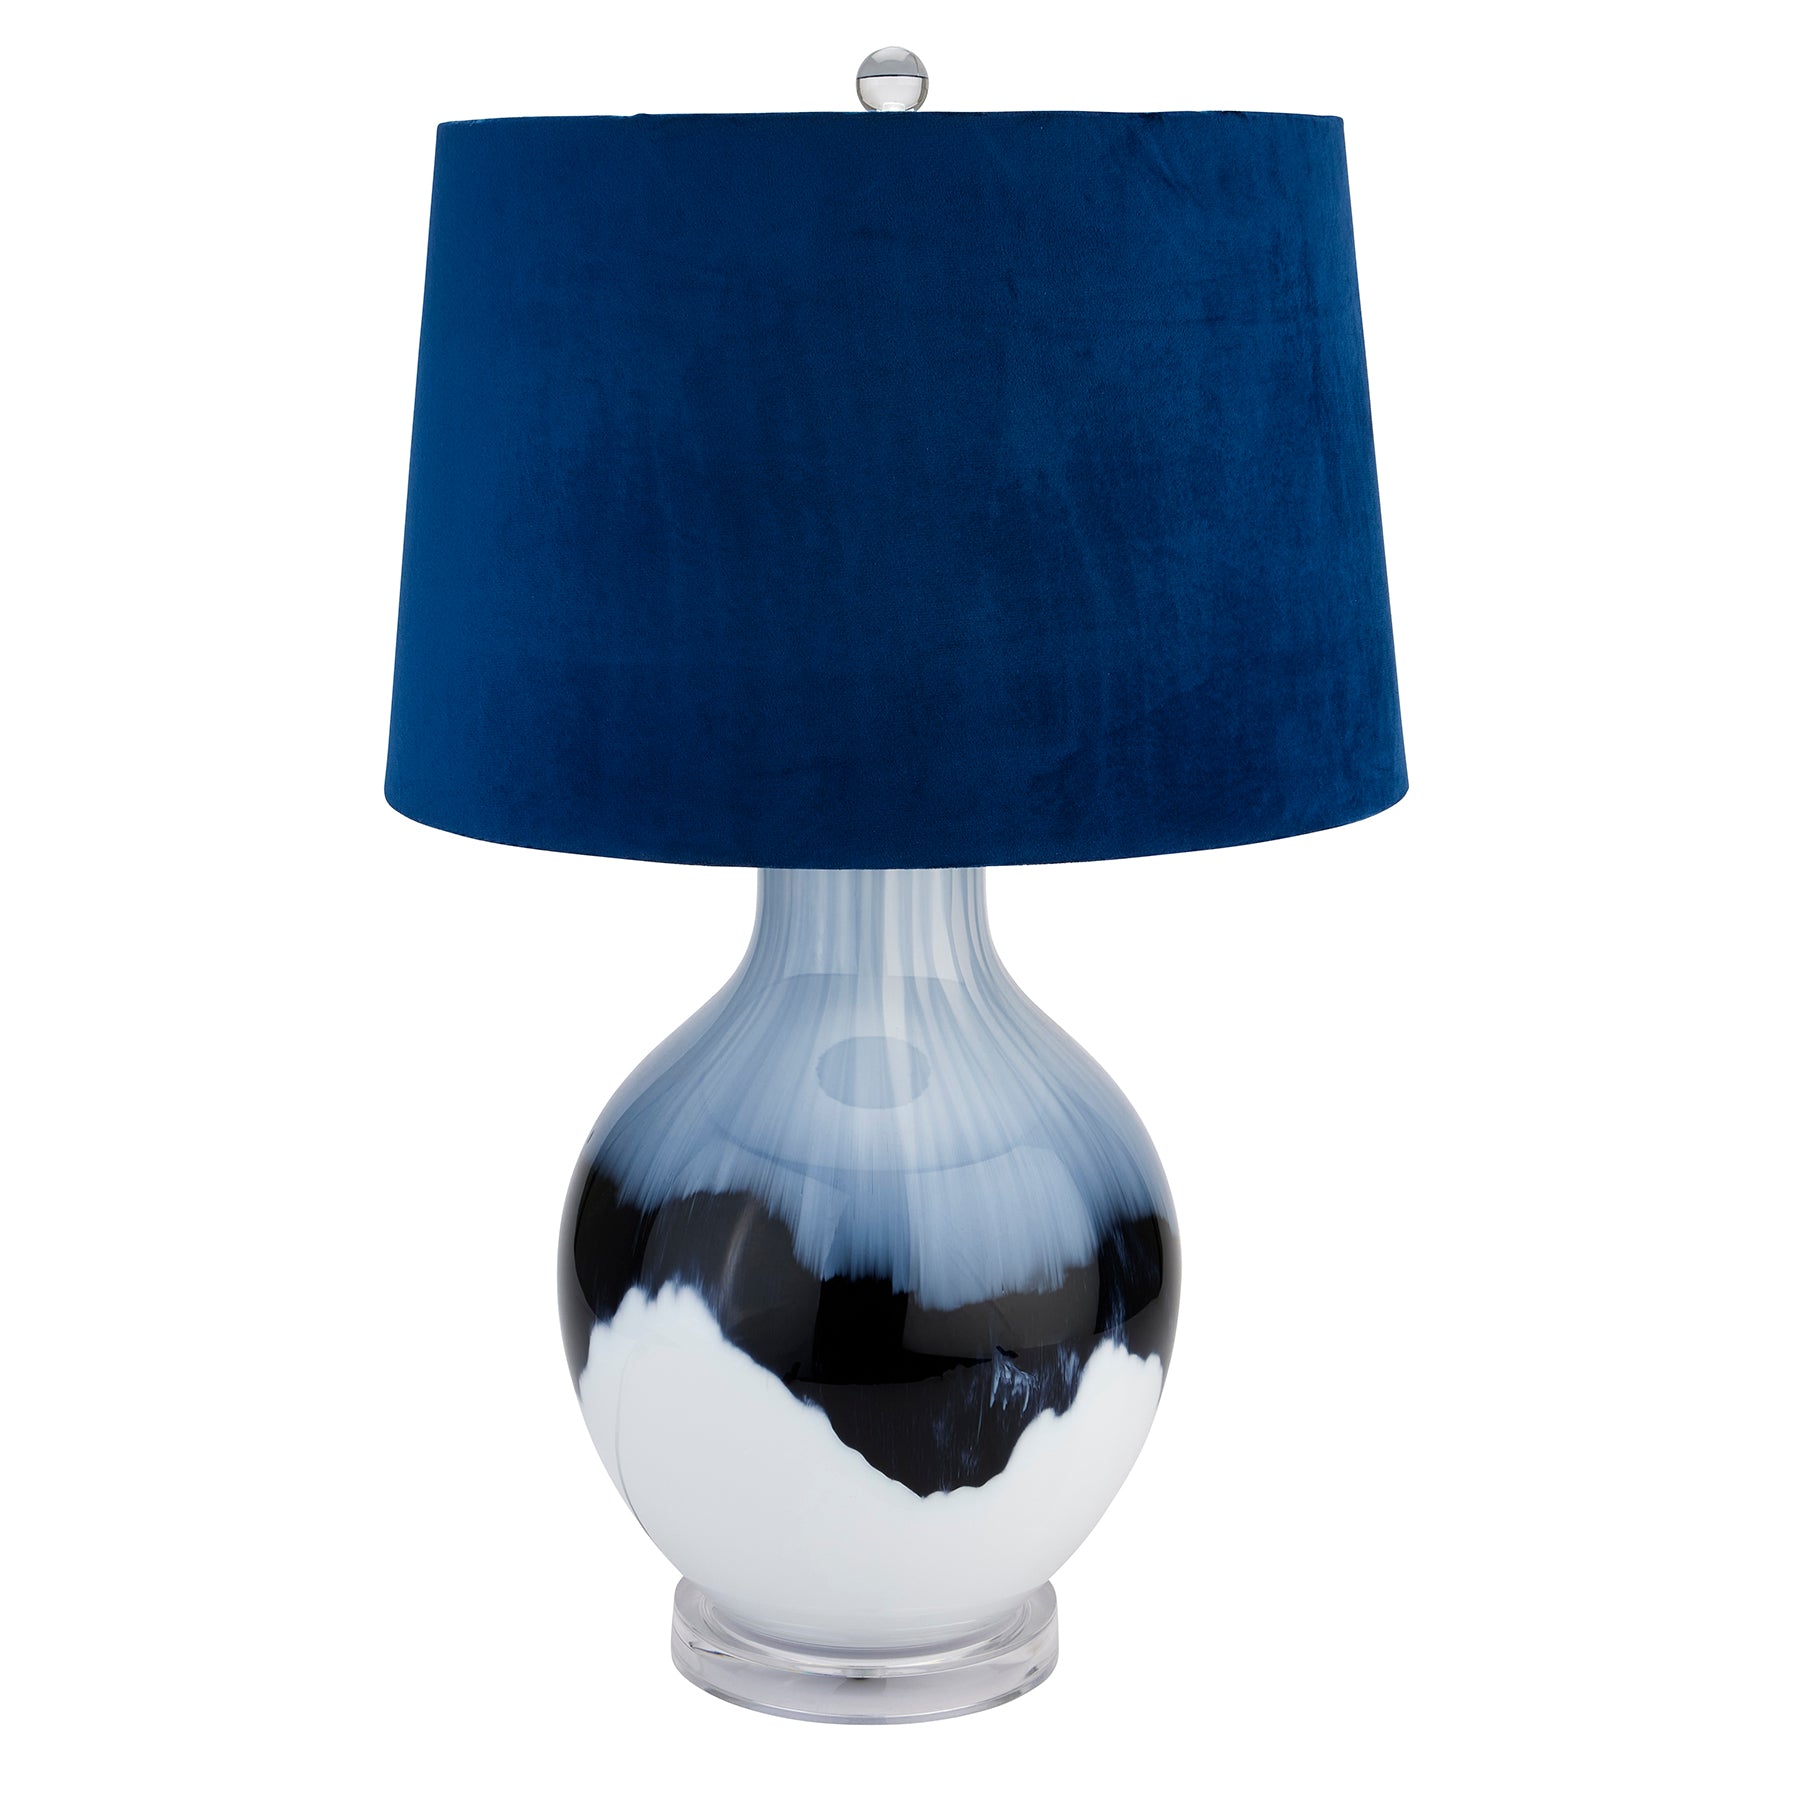 View Ice Shadows Table Lamp With Navy Blue Lampshade information